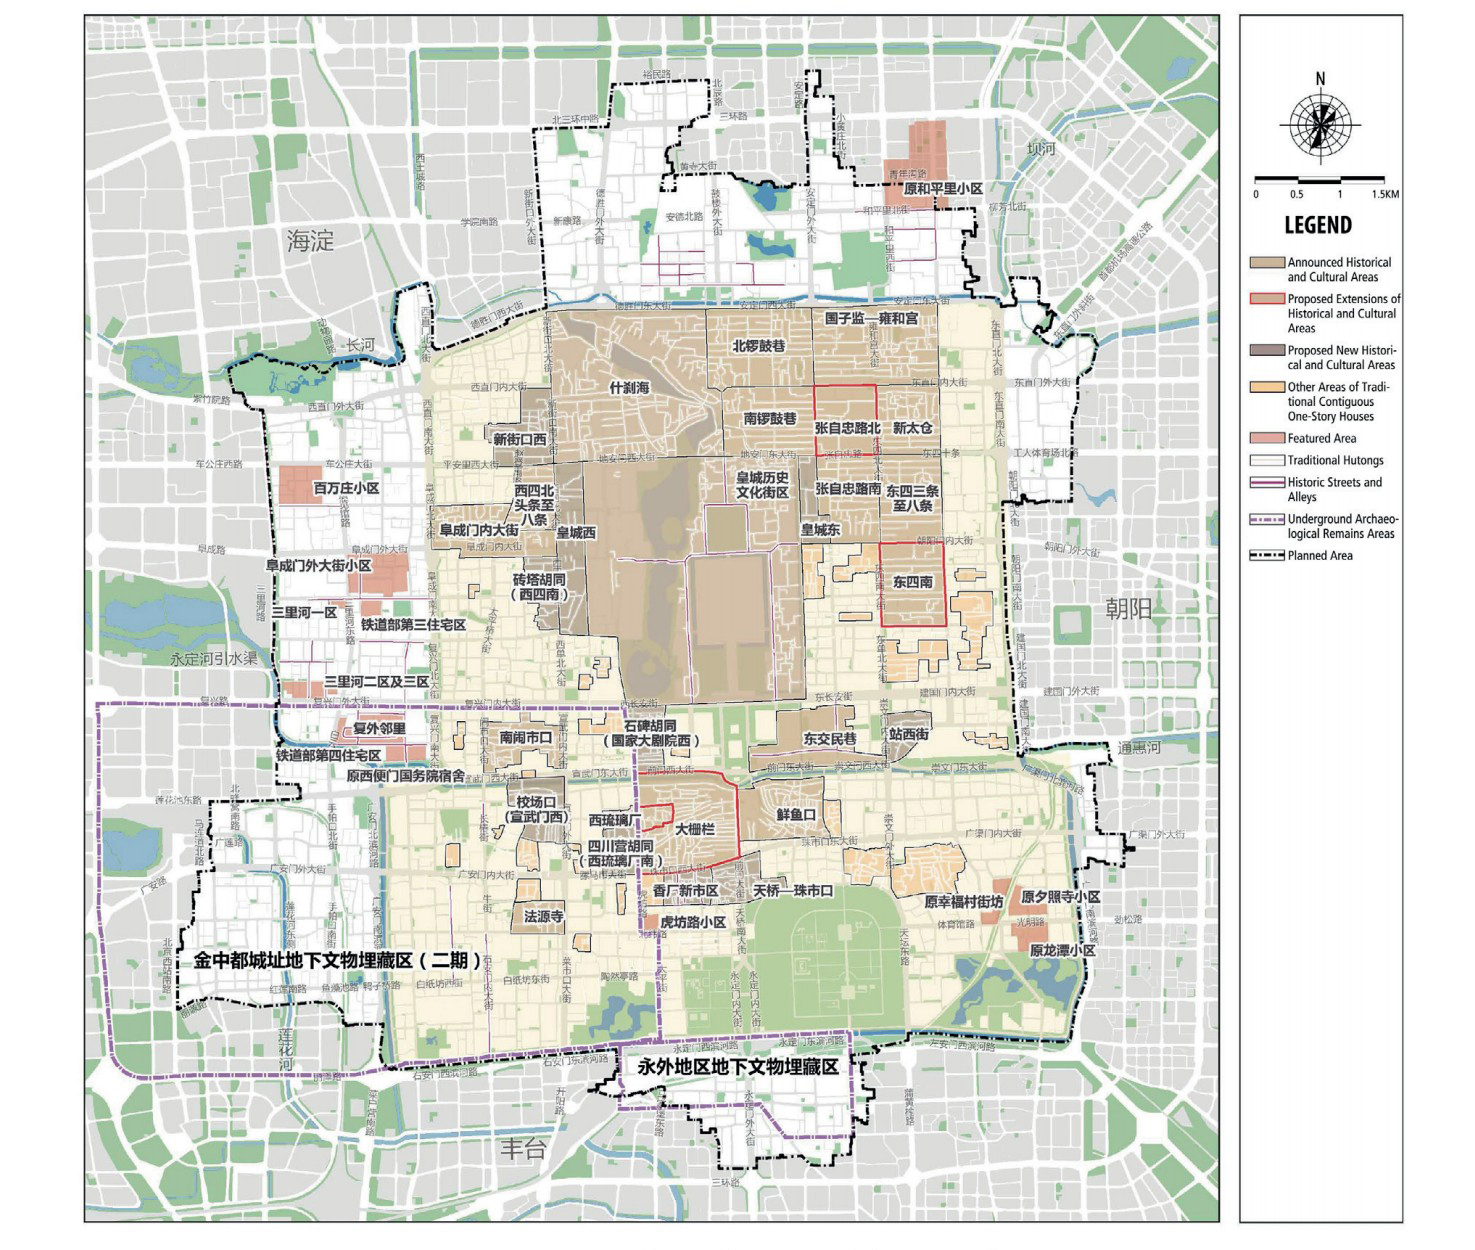 Regulatory Plan for the Core Area of the Capital (Block Level) (2018-2035)-Map of Historical and Cultural Areas, Featured Areas and Underground Archeological Remains Areas